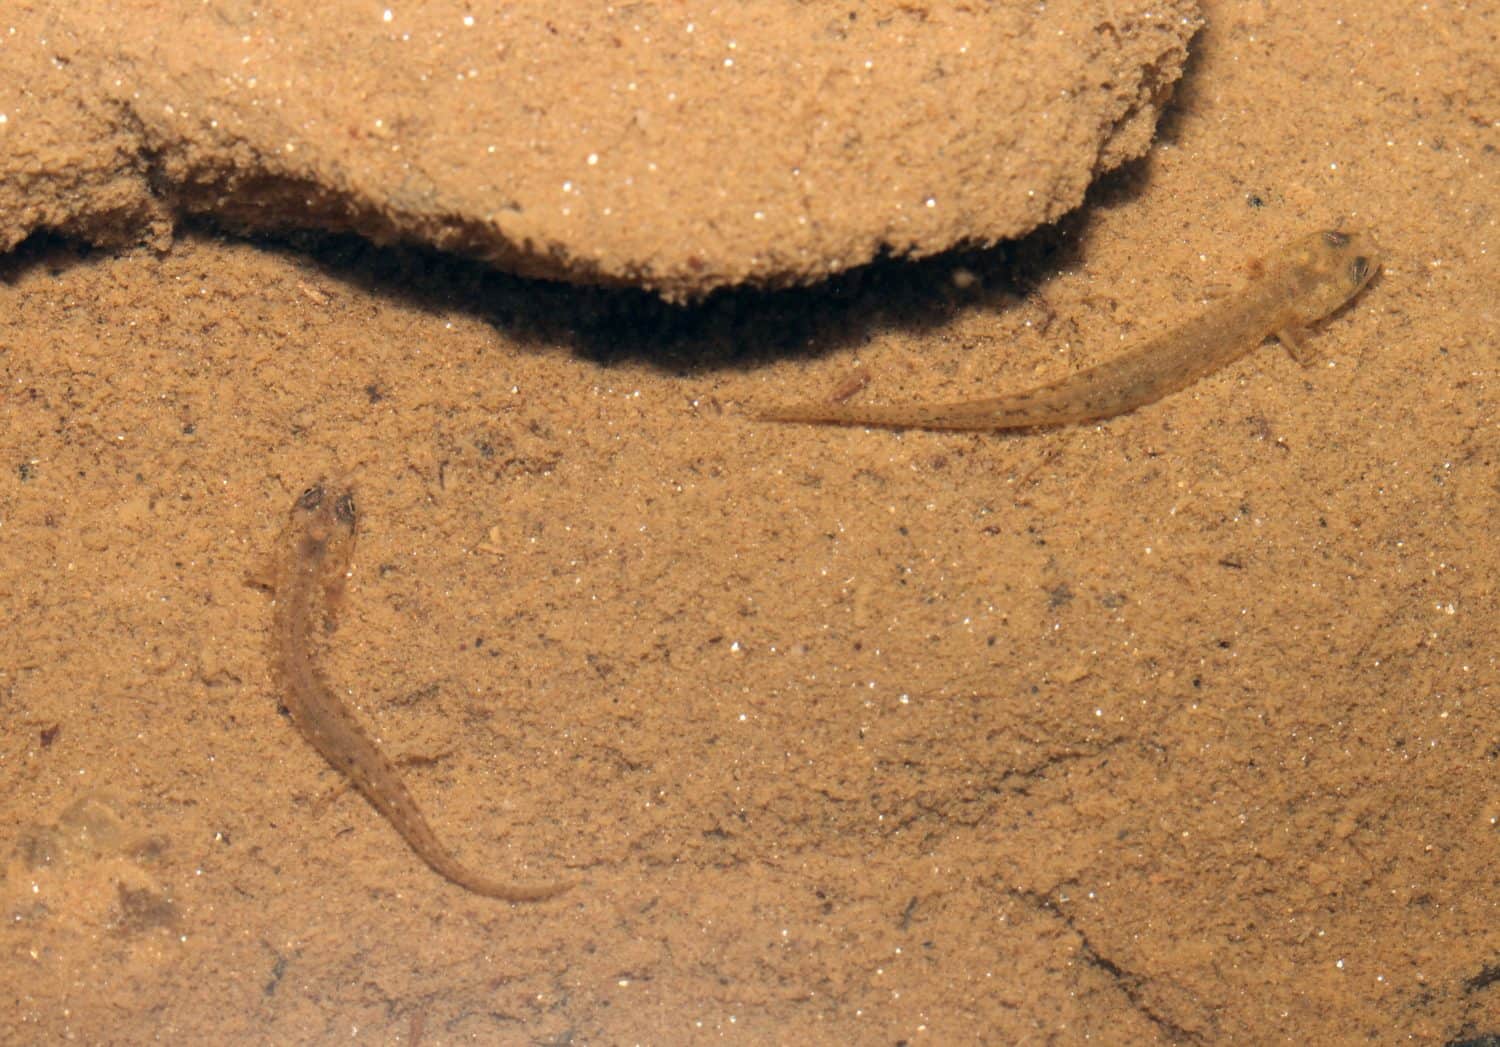 Two larvae of the southern two-lined salamander (Eurycea cirrigera) photographed in their natural habitat at the bottom of a small creek.  